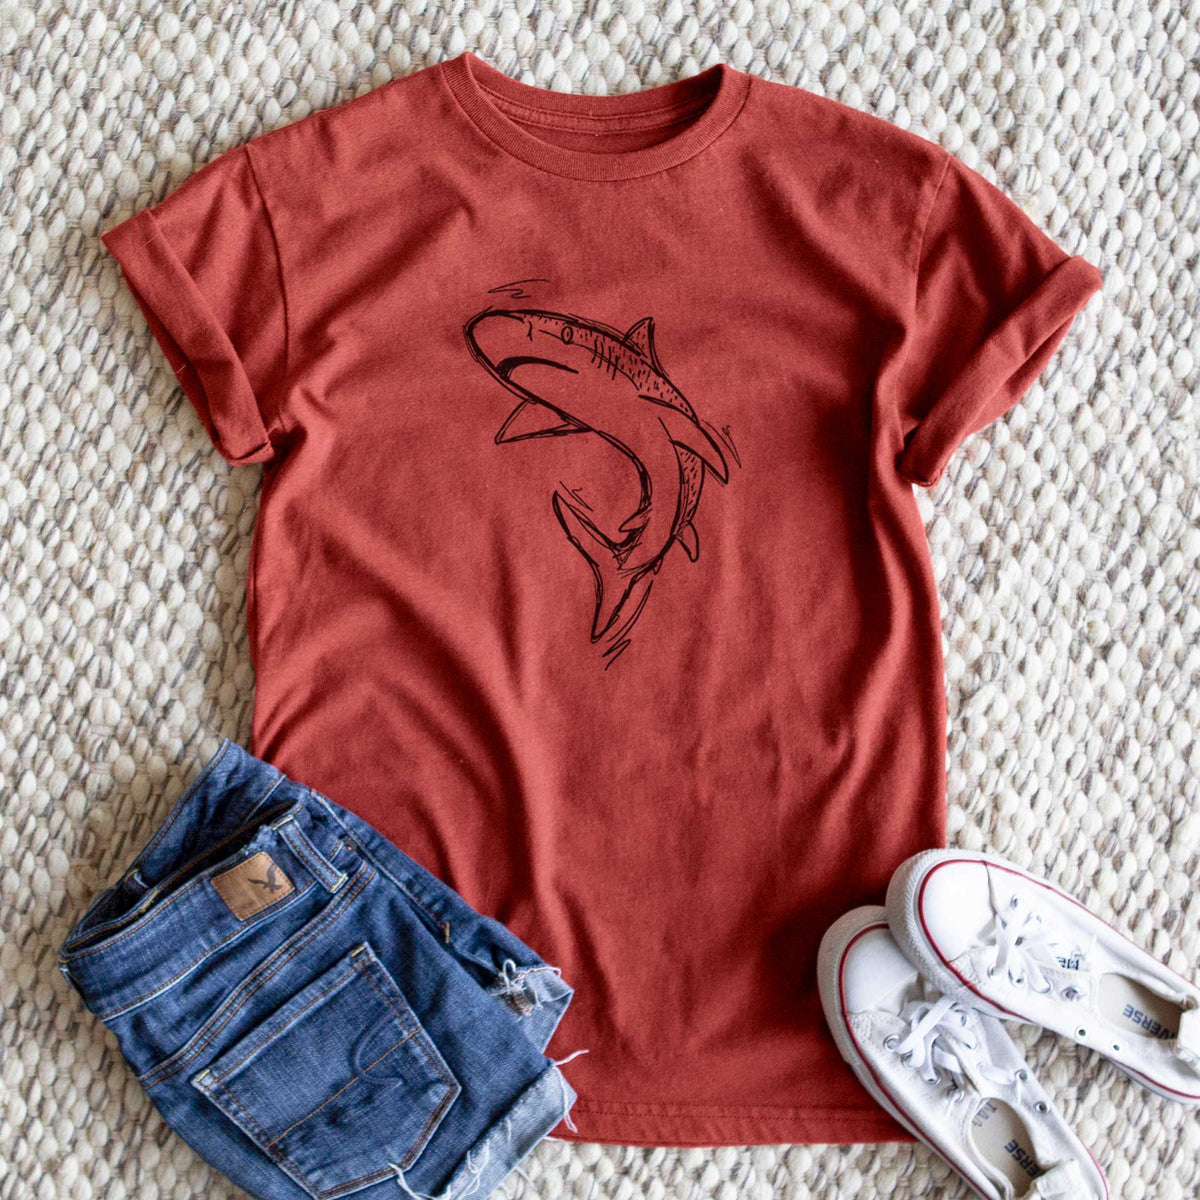 Tiger Shark - Unisex Recycled Eco Tee  - CLOSEOUT - FINAL SALE